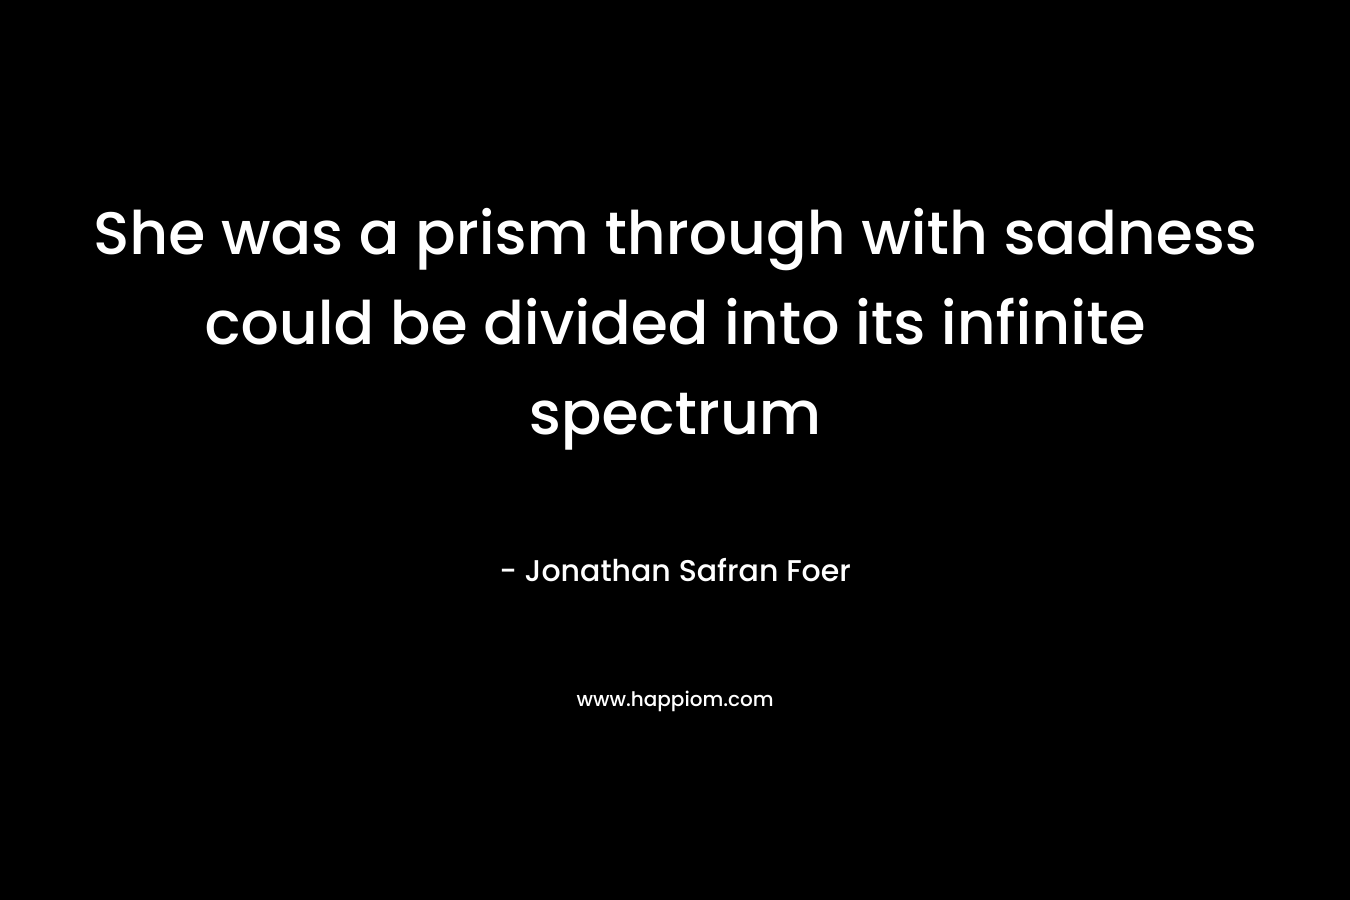 She was a prism through with sadness could be divided into its infinite spectrum – Jonathan Safran Foer